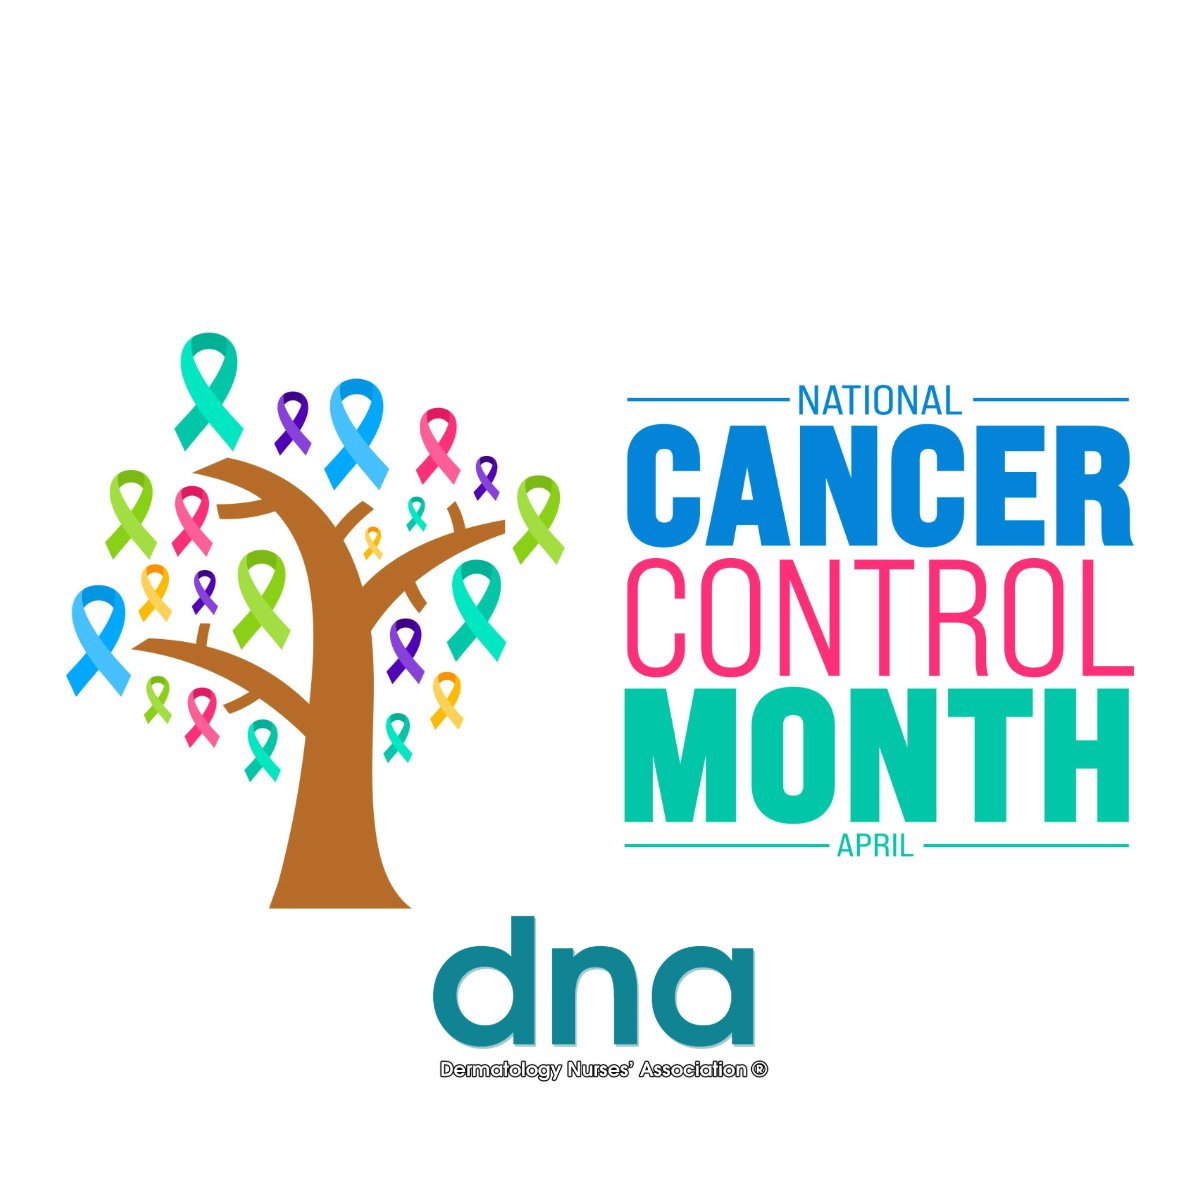 Cancer Control Month is observed during the month of April every year. It is a national observance that aims to educate people about living healthy lives and making lifestyle choices that decrease the risk of cancer.

#DNA #CancerControlMonth #MelanomaMonday #DermatologyNursing